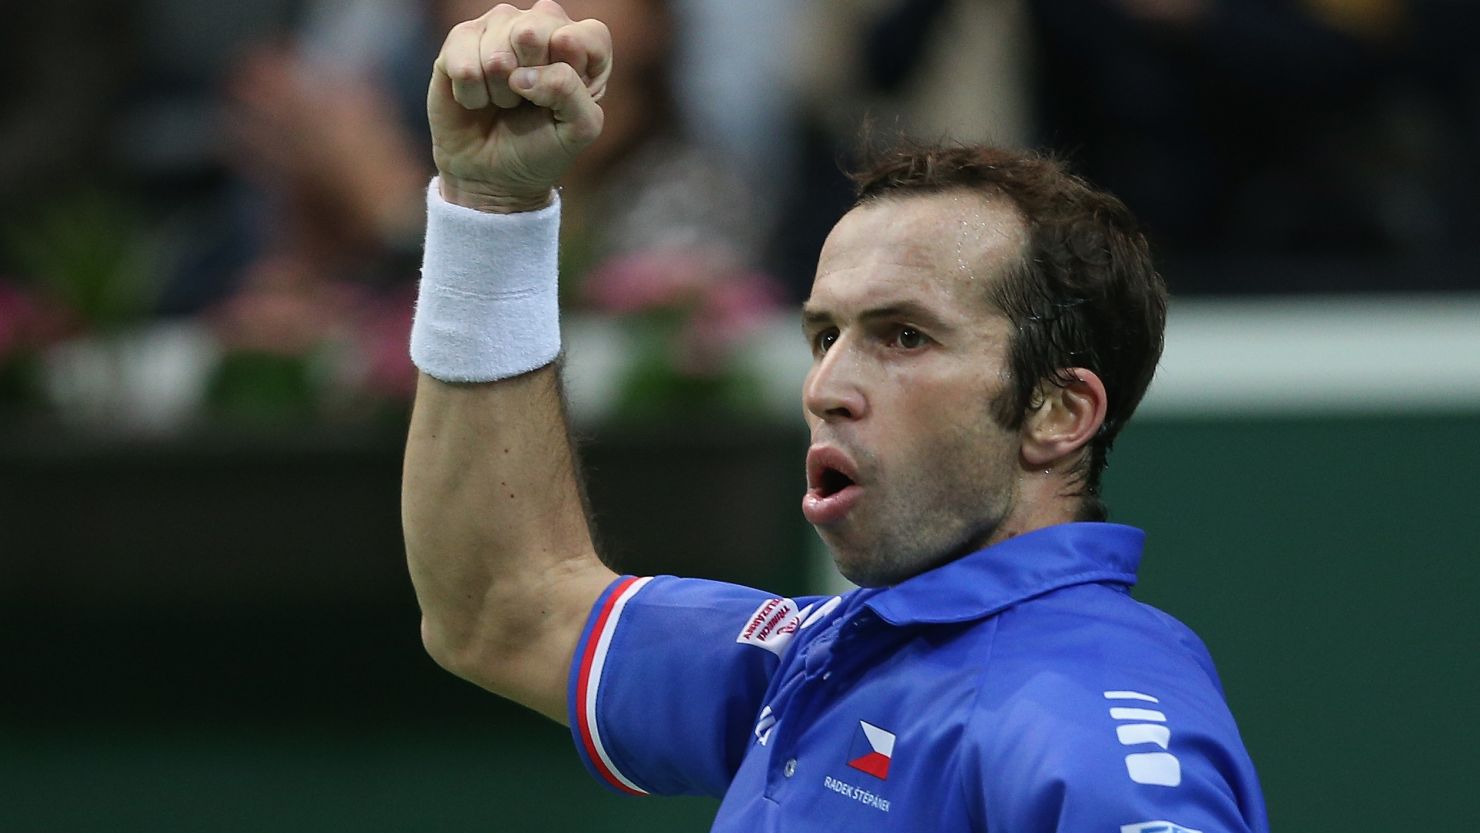 Radek Stepanek delivered the Czech Republic's first Davis Cup triumph since 1980 by beating Spain's Nicolas Almagro